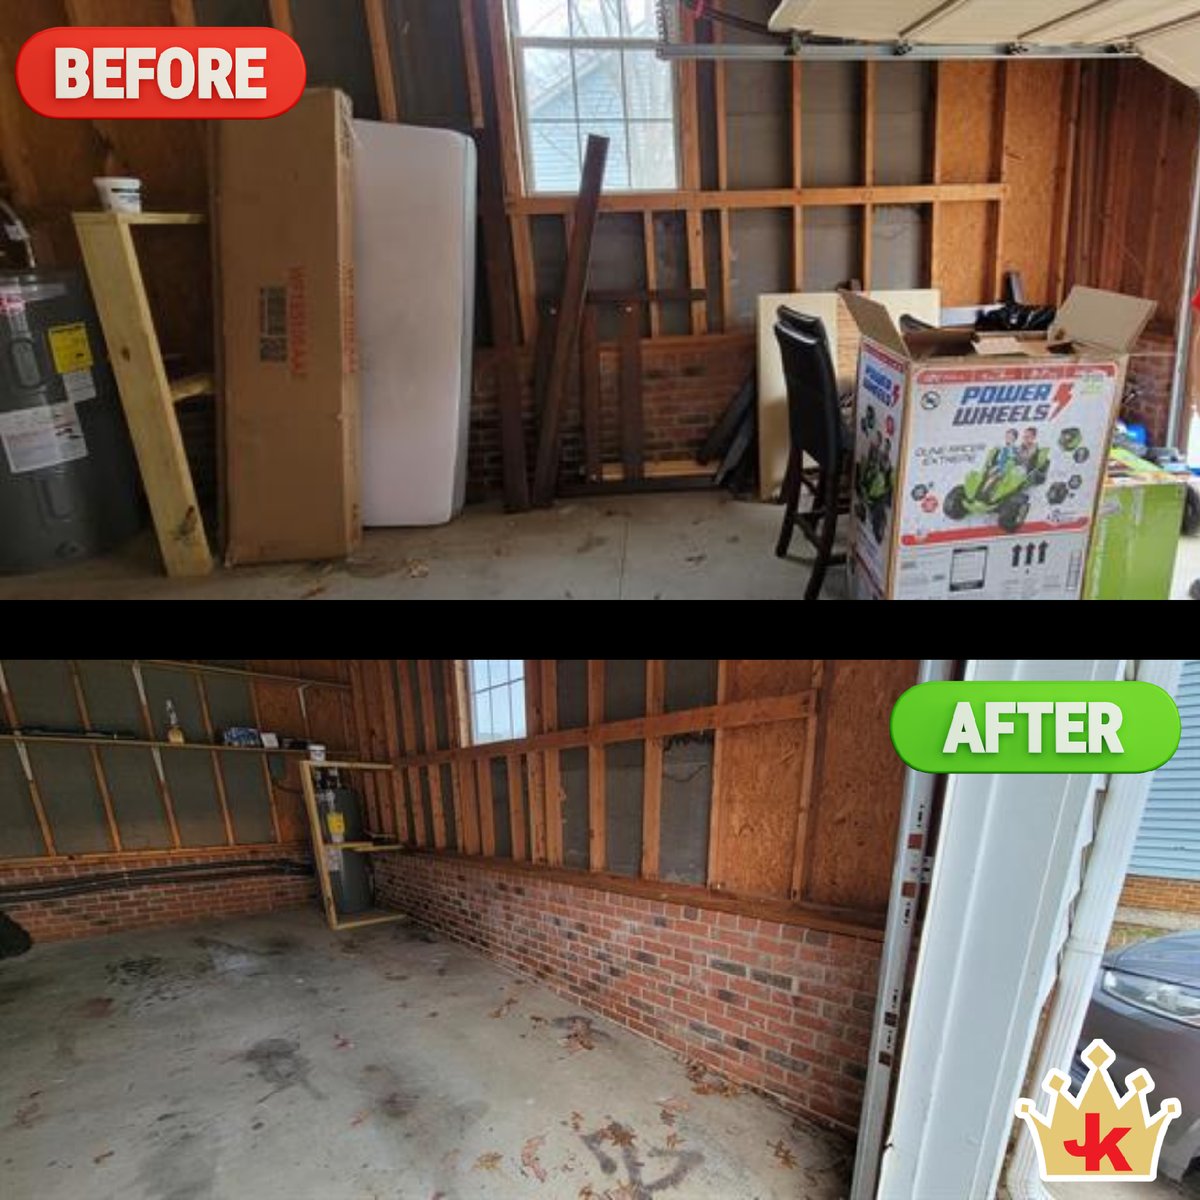 Garage full? Let Junk King Atlanta North haul away the mess. Enjoy a spotless space in no time! Our services are top rated so book online or over the phone today! 🏠✨ #junkremoval #trashremoval #junkking #applianceremoval #junkremovalnearme #trash #junkhauling #toprated